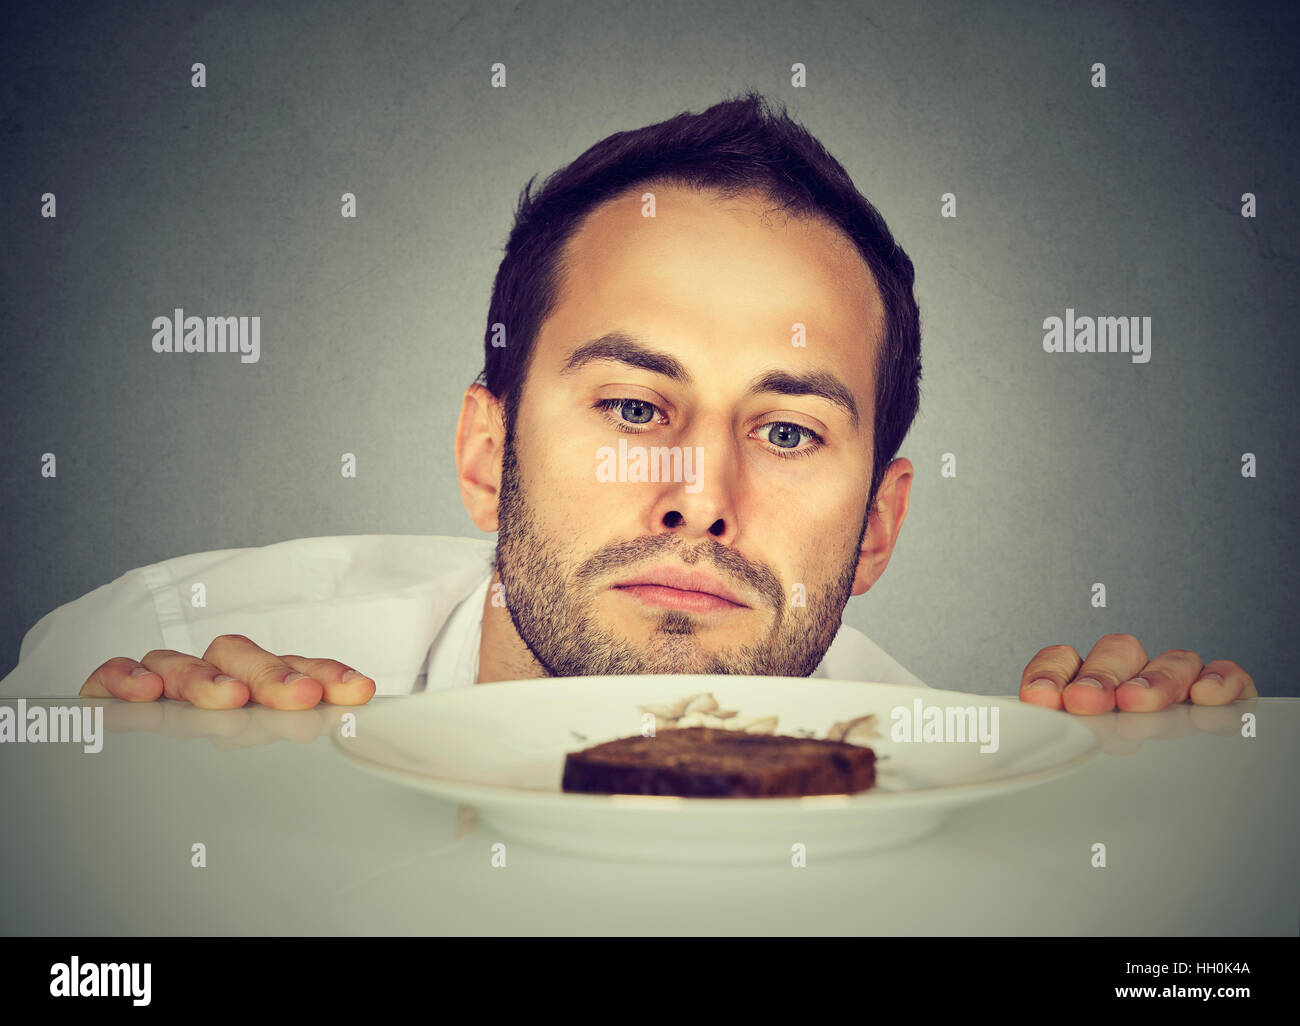 Hungry man craving sweet food Stock Photo